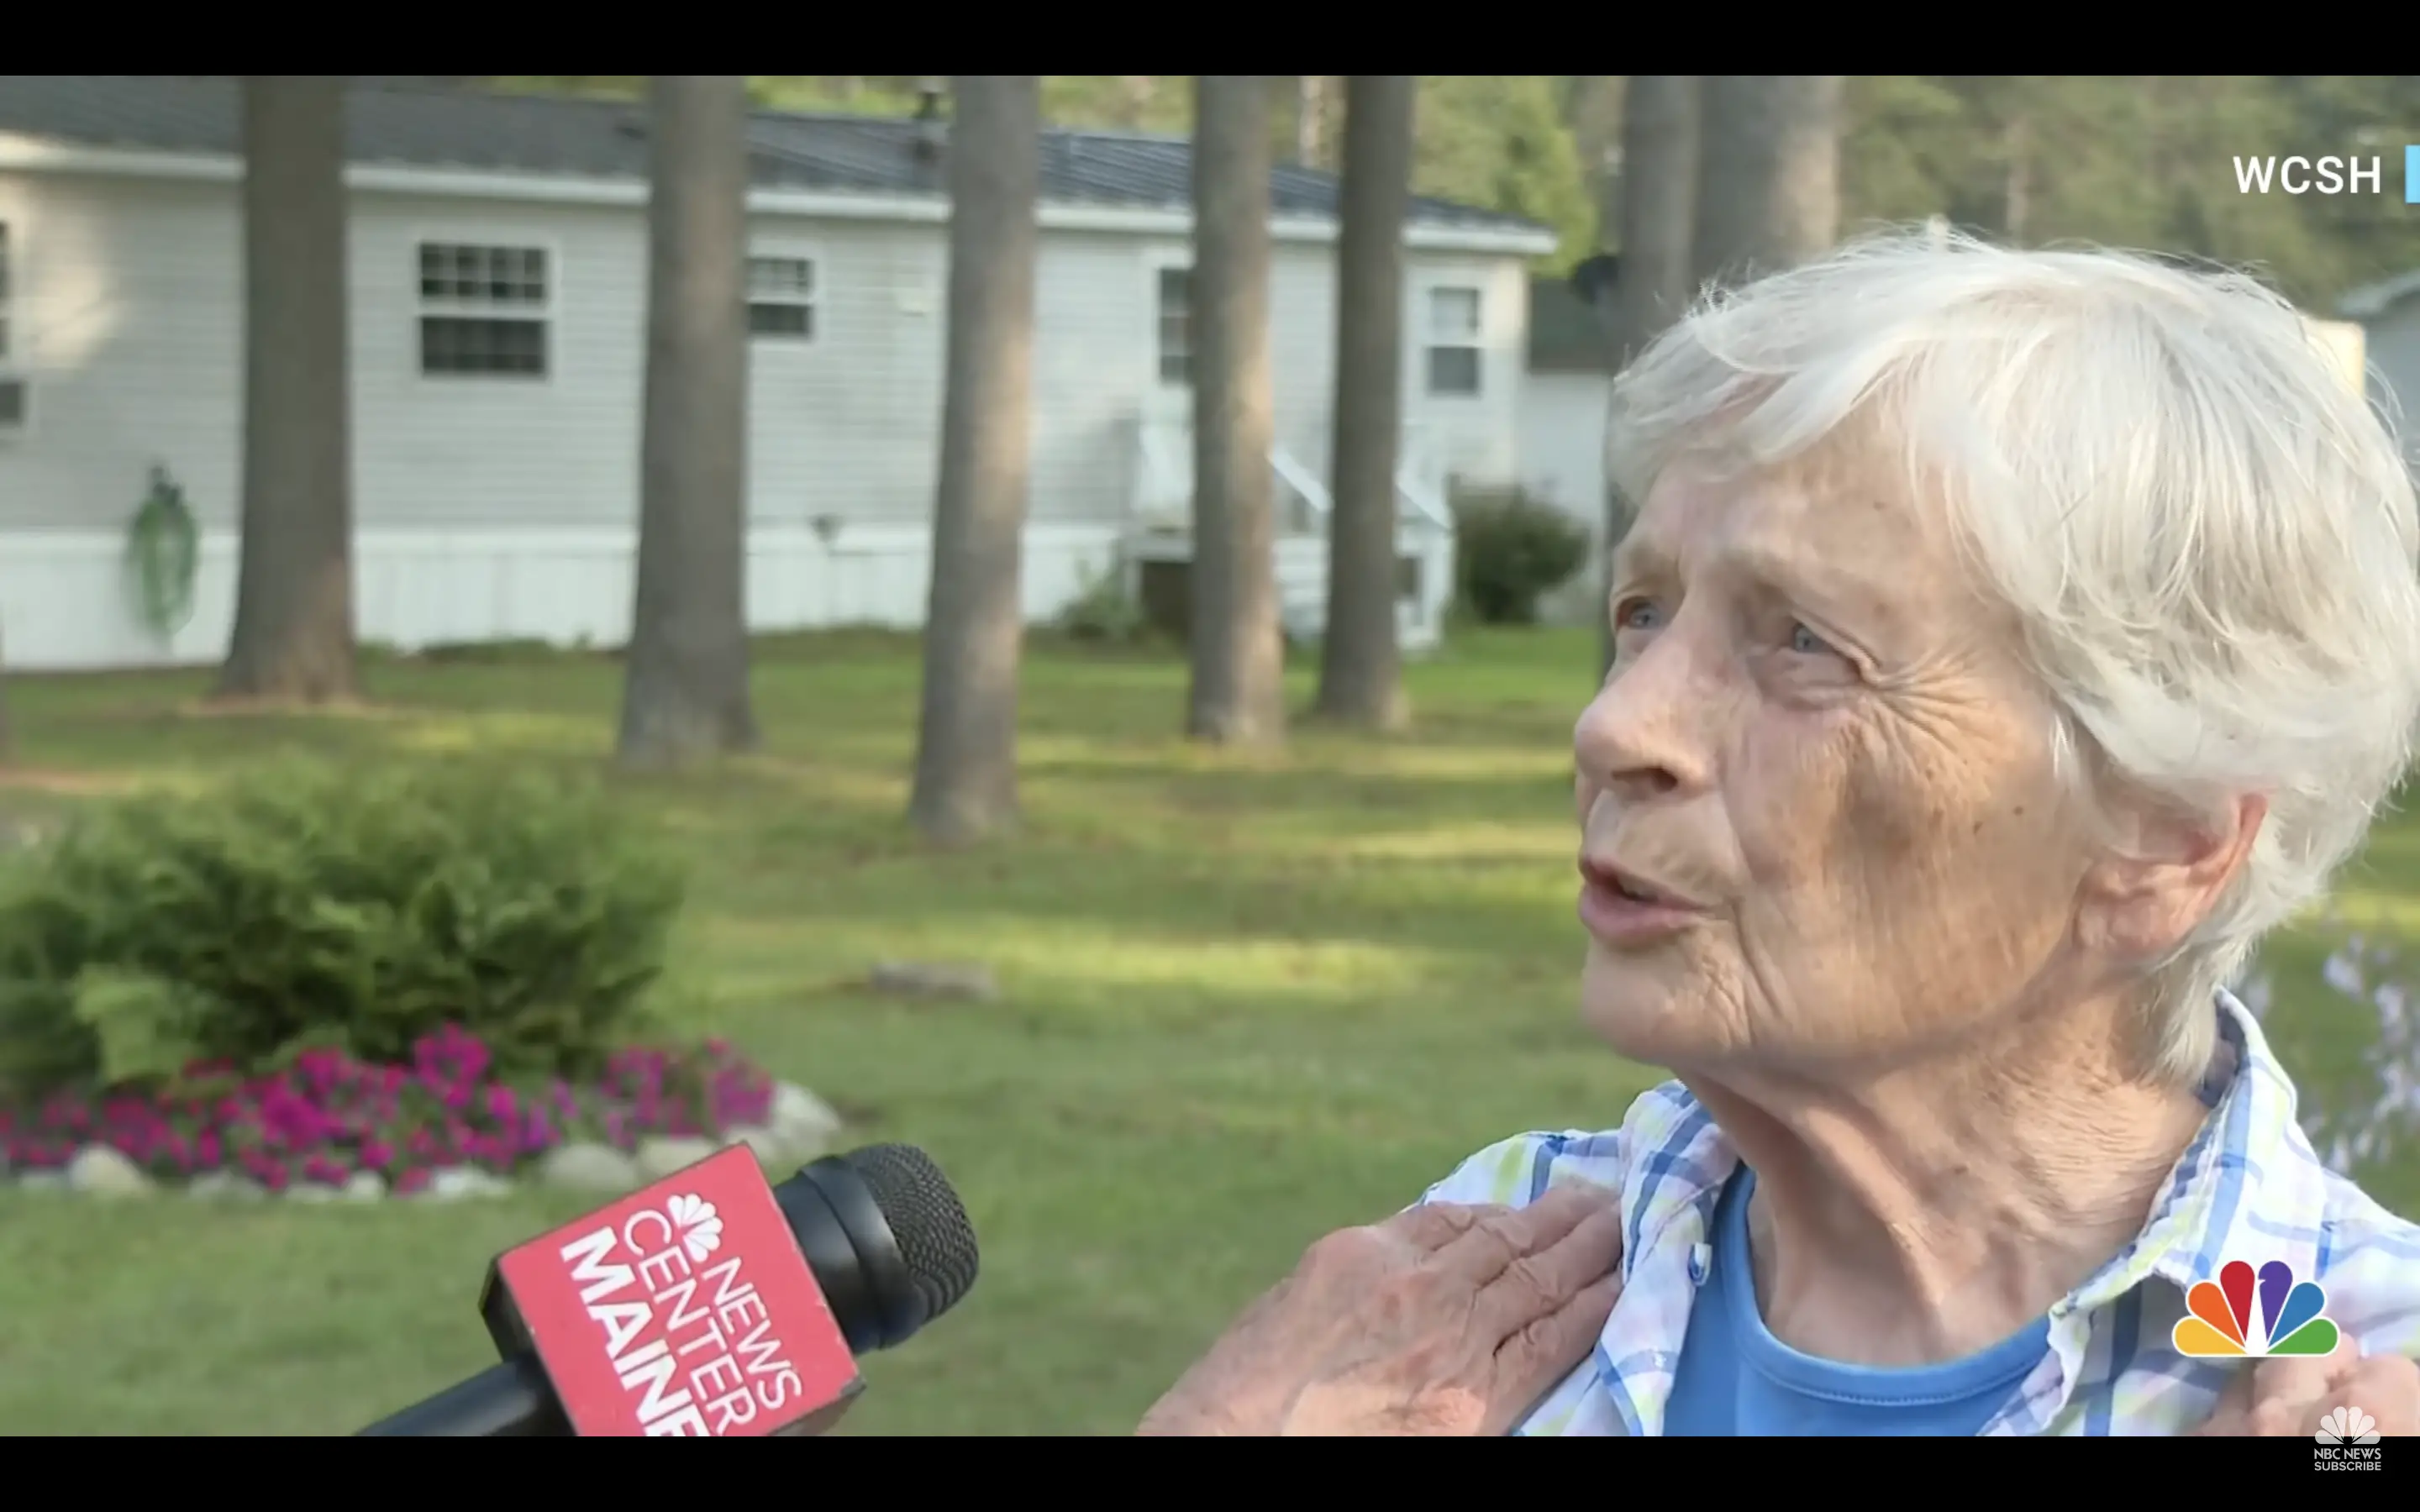 Marjorie Perkins explained how she had to protect herself from the intruder. | Source: Youtube.com/NBC News